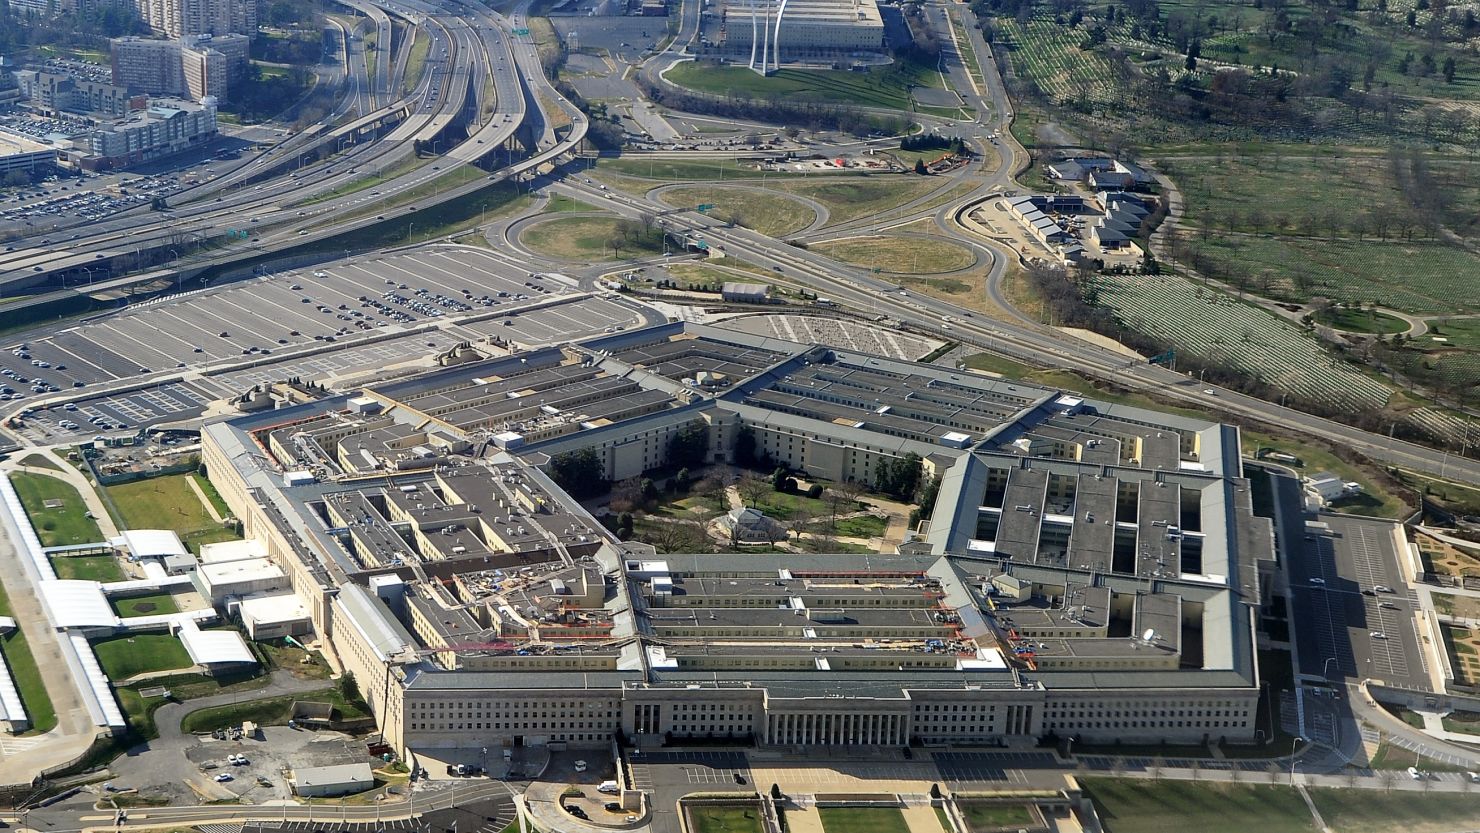 The Pentagon, where homosexuality was cause for discipline until recently, will hold a Gay Pride Month event in June.